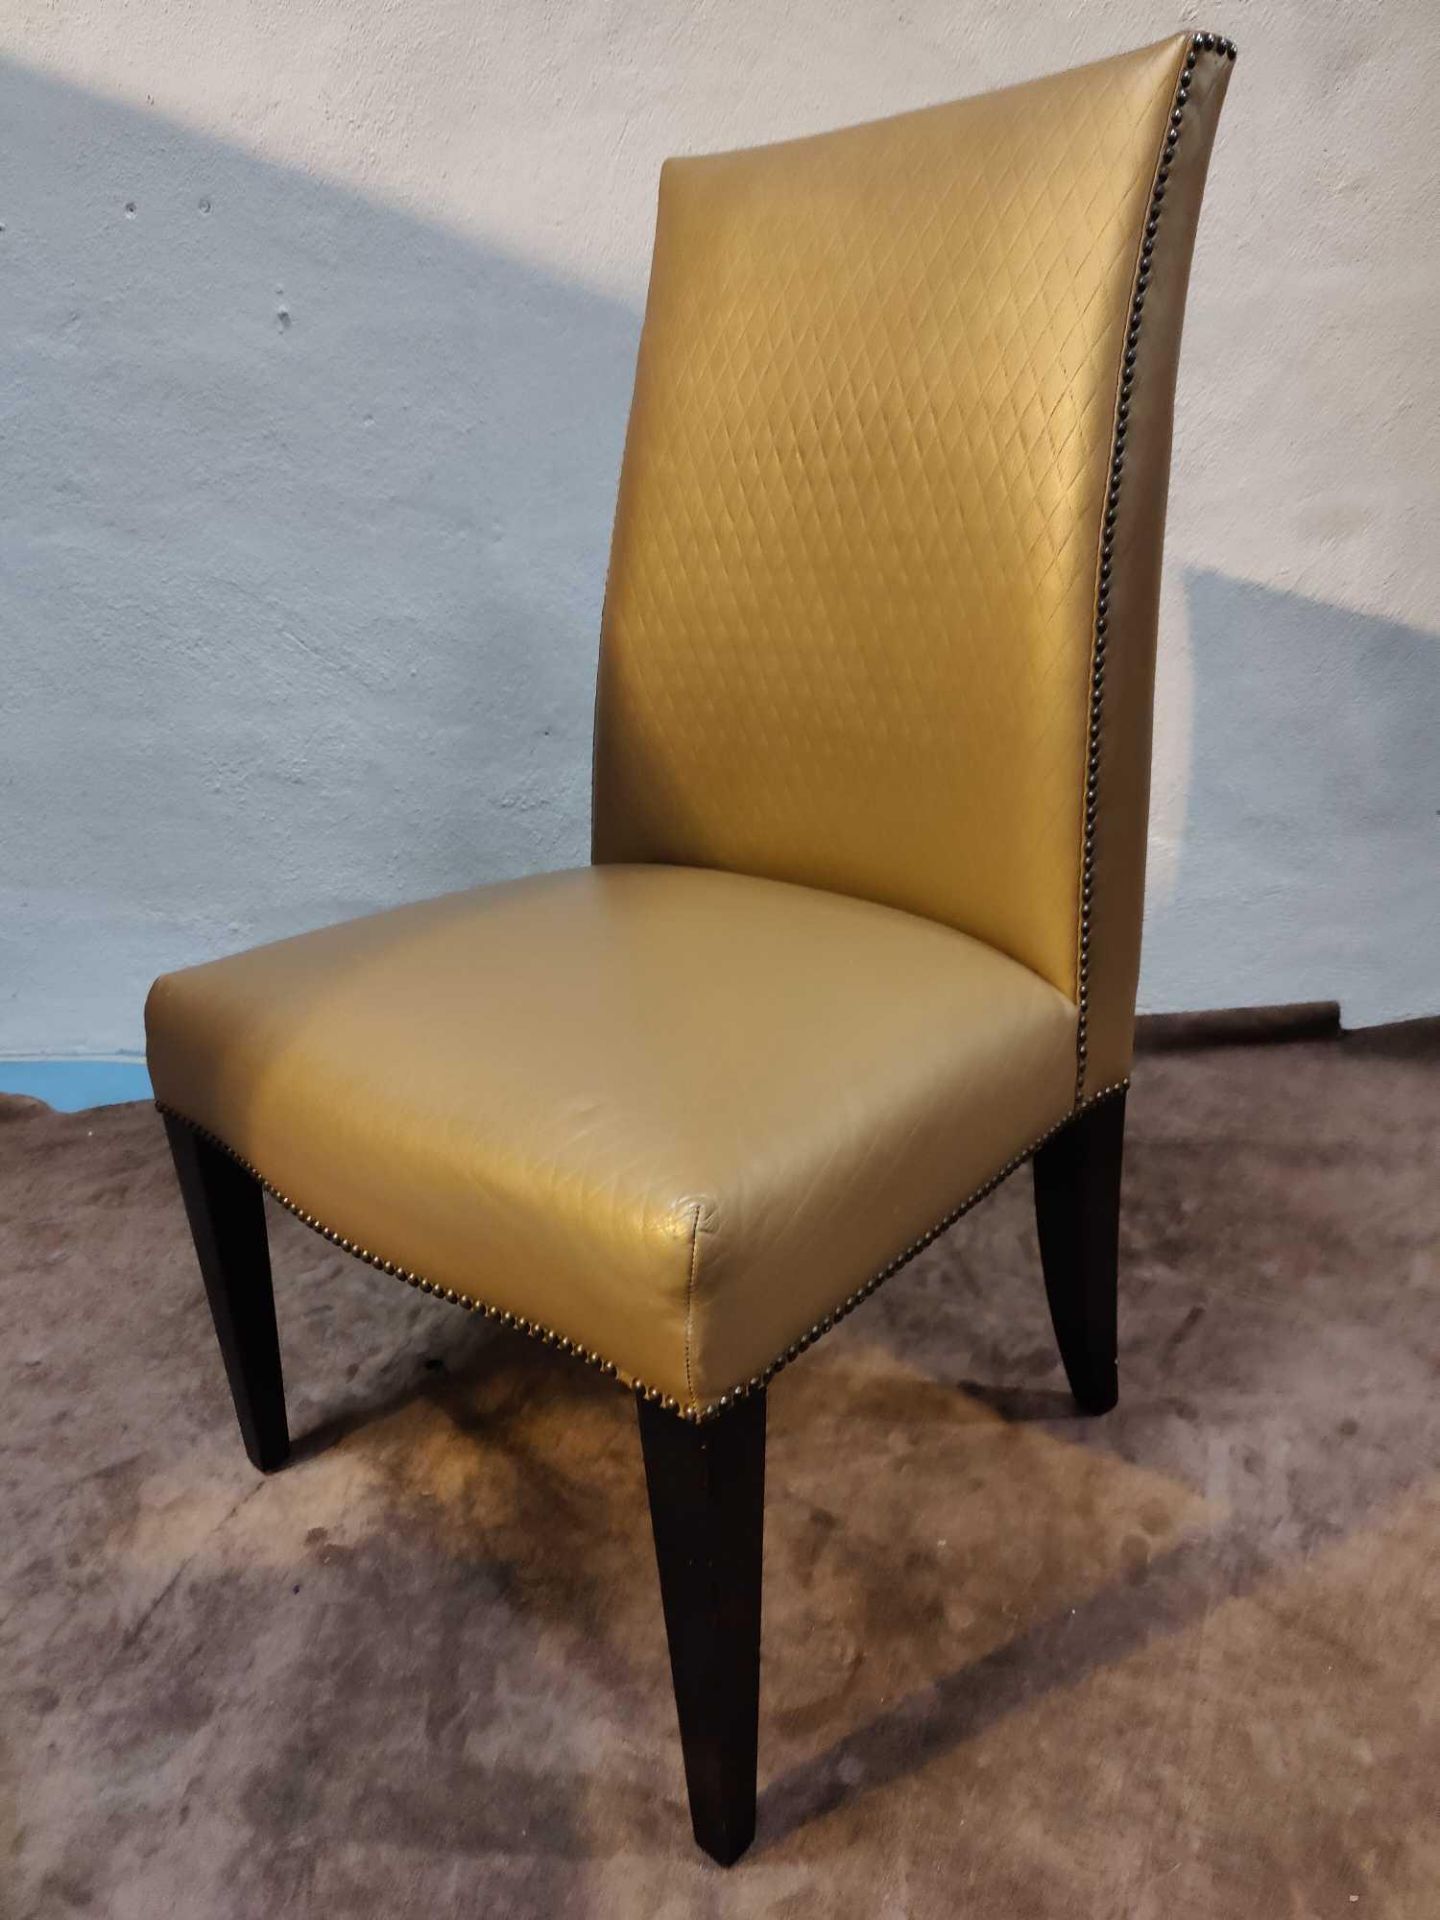 A Leather Upholstered Tall Back Quilted Leather Side Chair 60 x 55 x 101cm